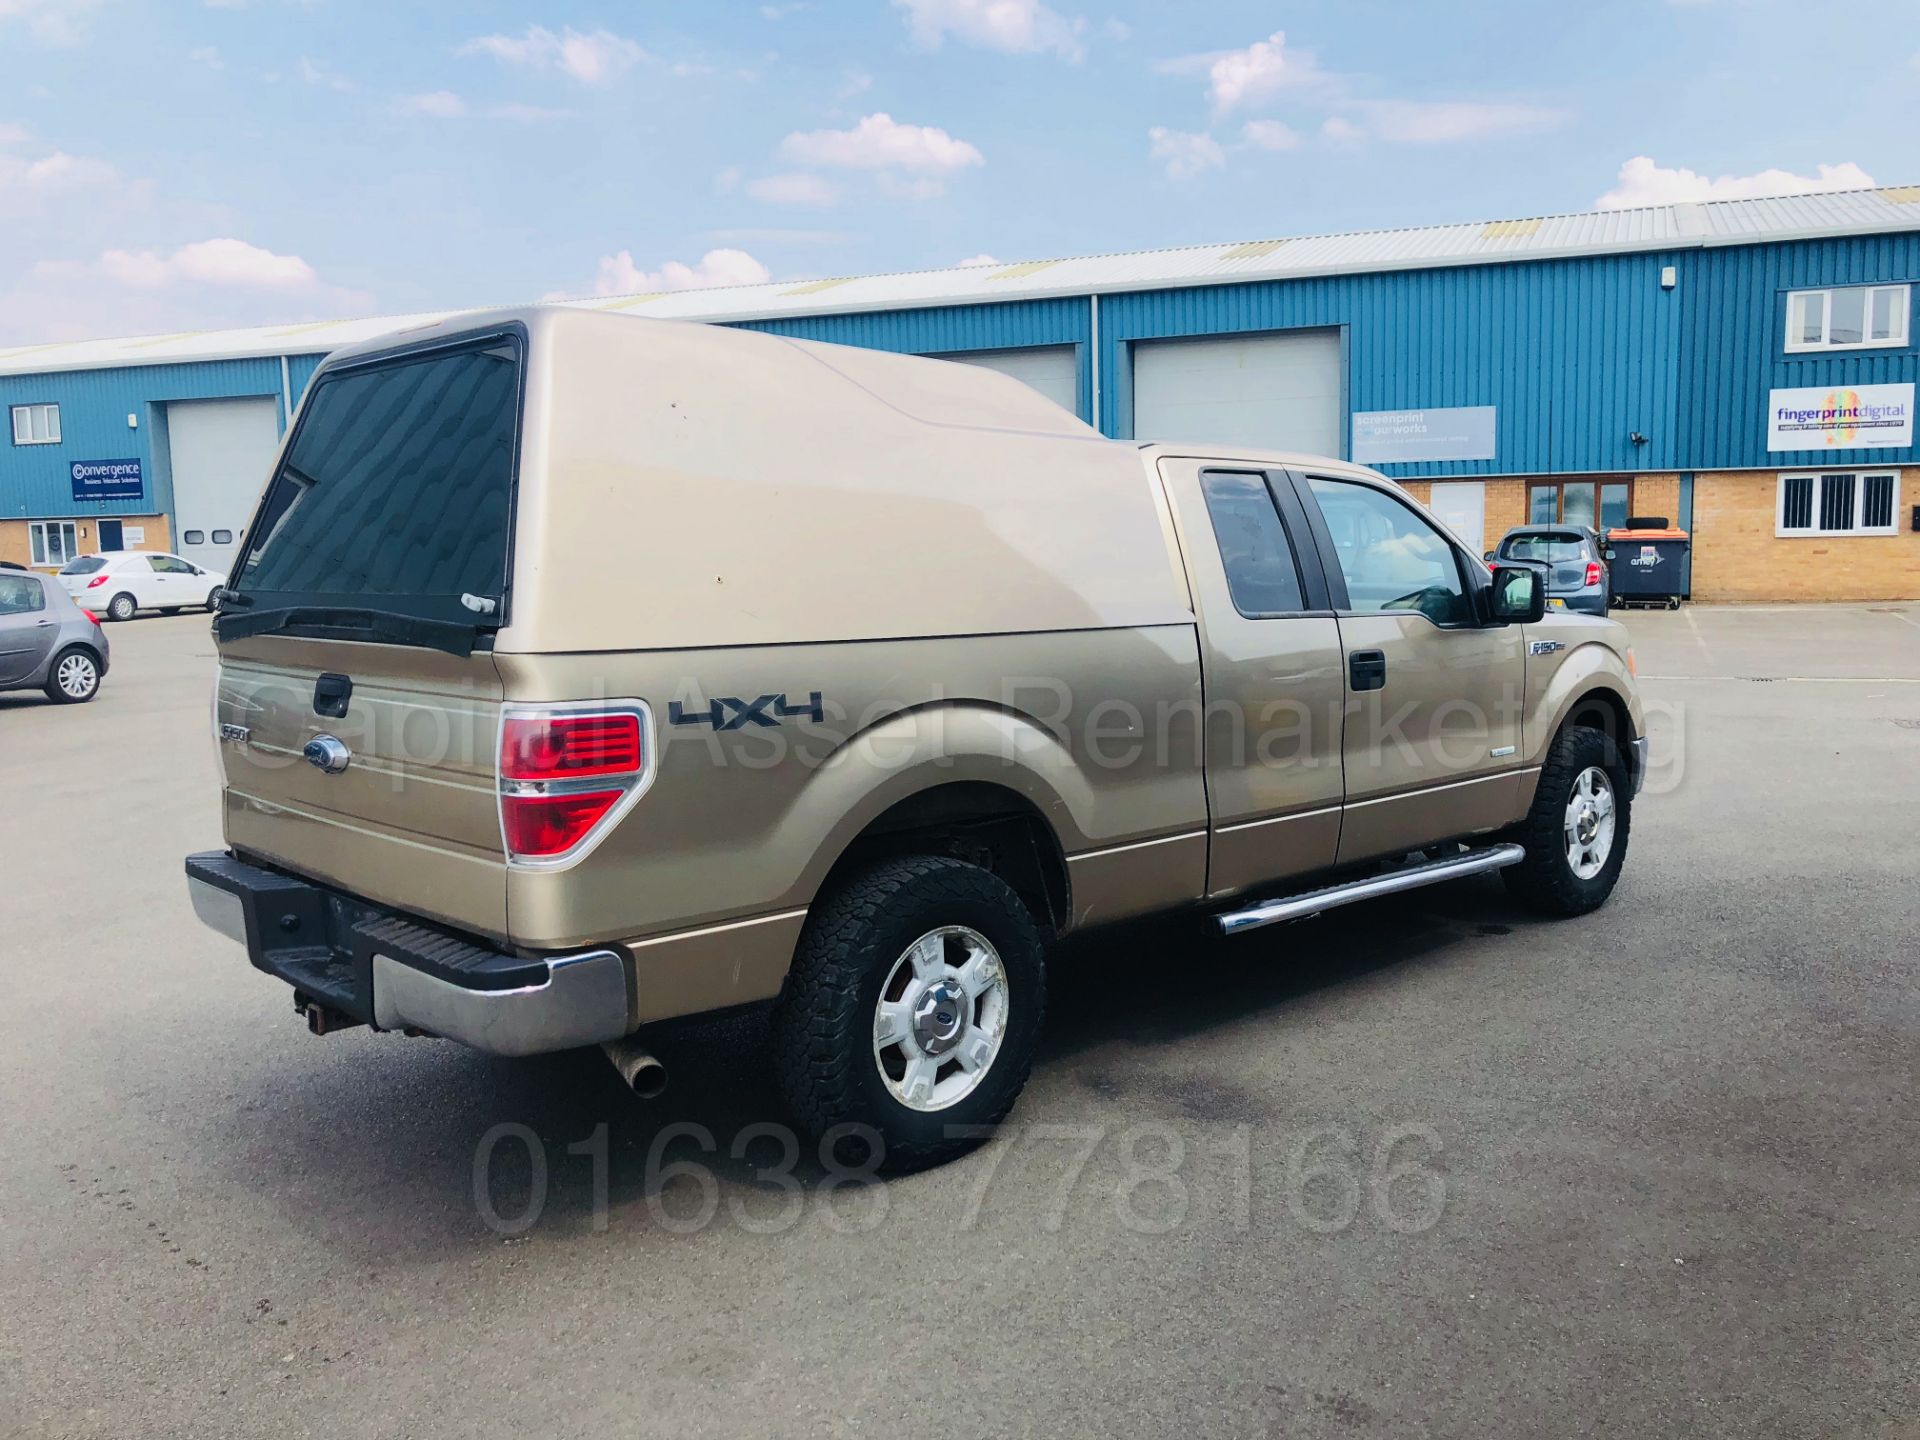 (On Sale) FORD F-150 5.4 V8 XLT EDITION KING-CAB (2012) MODEL**4X4**6 SEATER**AUTOMATIC *TOP SPEC* - Bild 14 aus 52